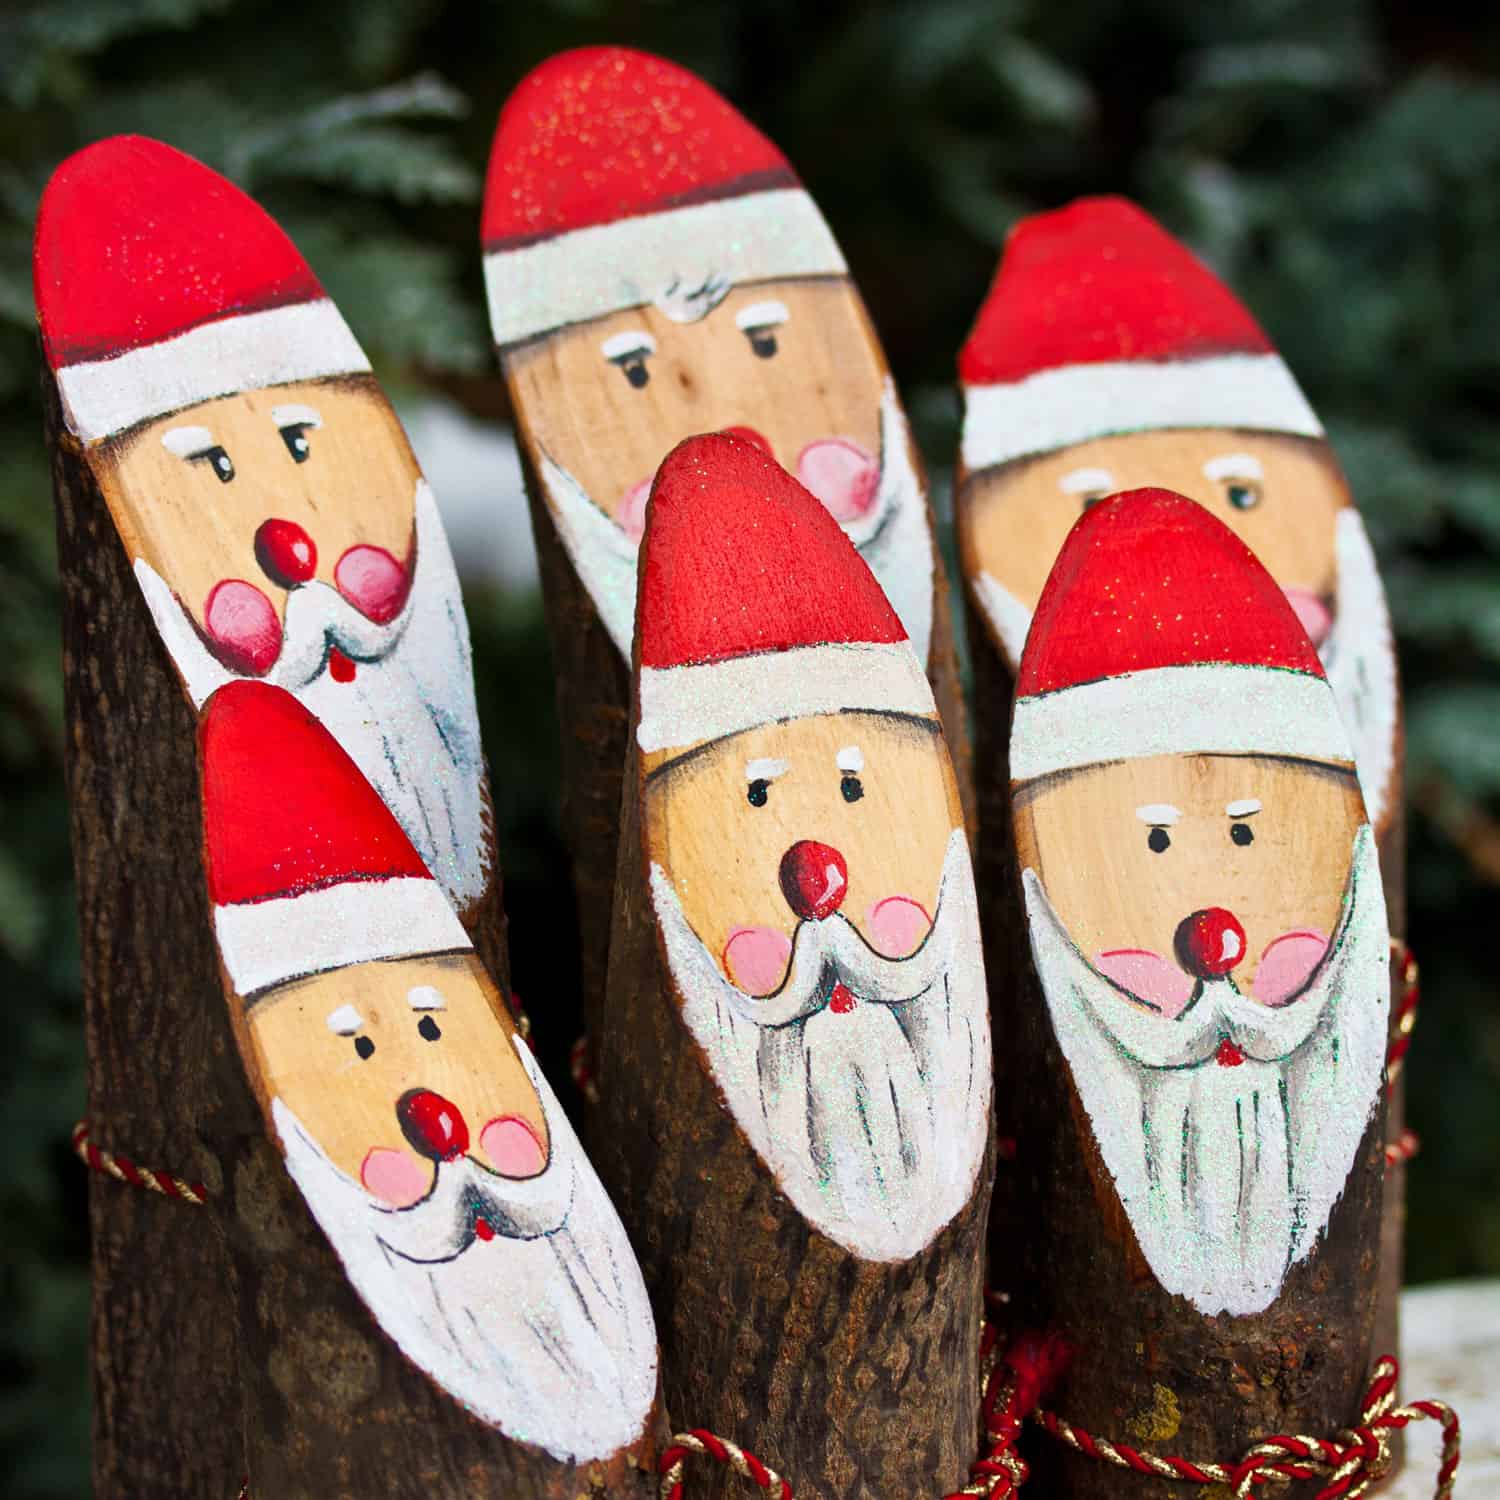 a trio of handcrafted Santa Claus figures carved into a vertically standing log, each sporting a red hat and a white beard with the largest Santa adorned with a green and red plaid ribbon scarf